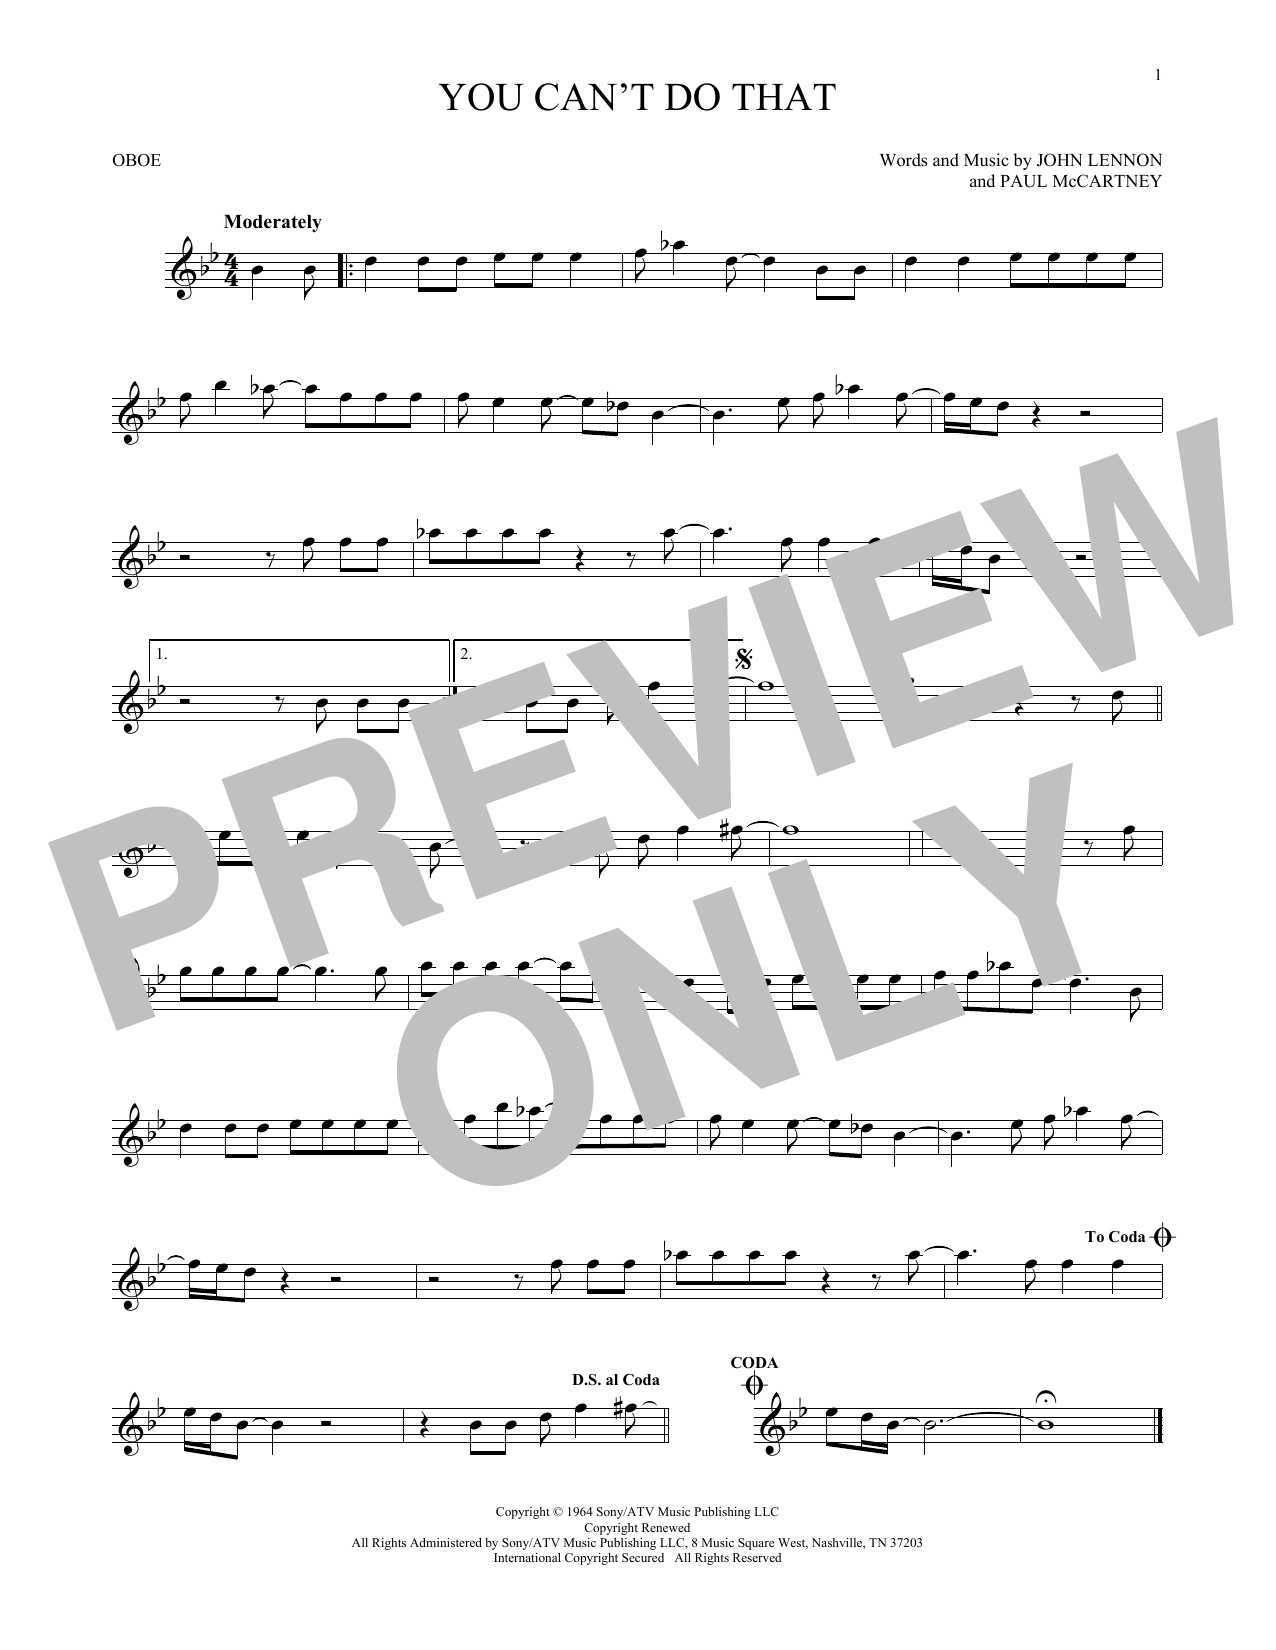 Download The Beatles You Can't Do That Sheet Music